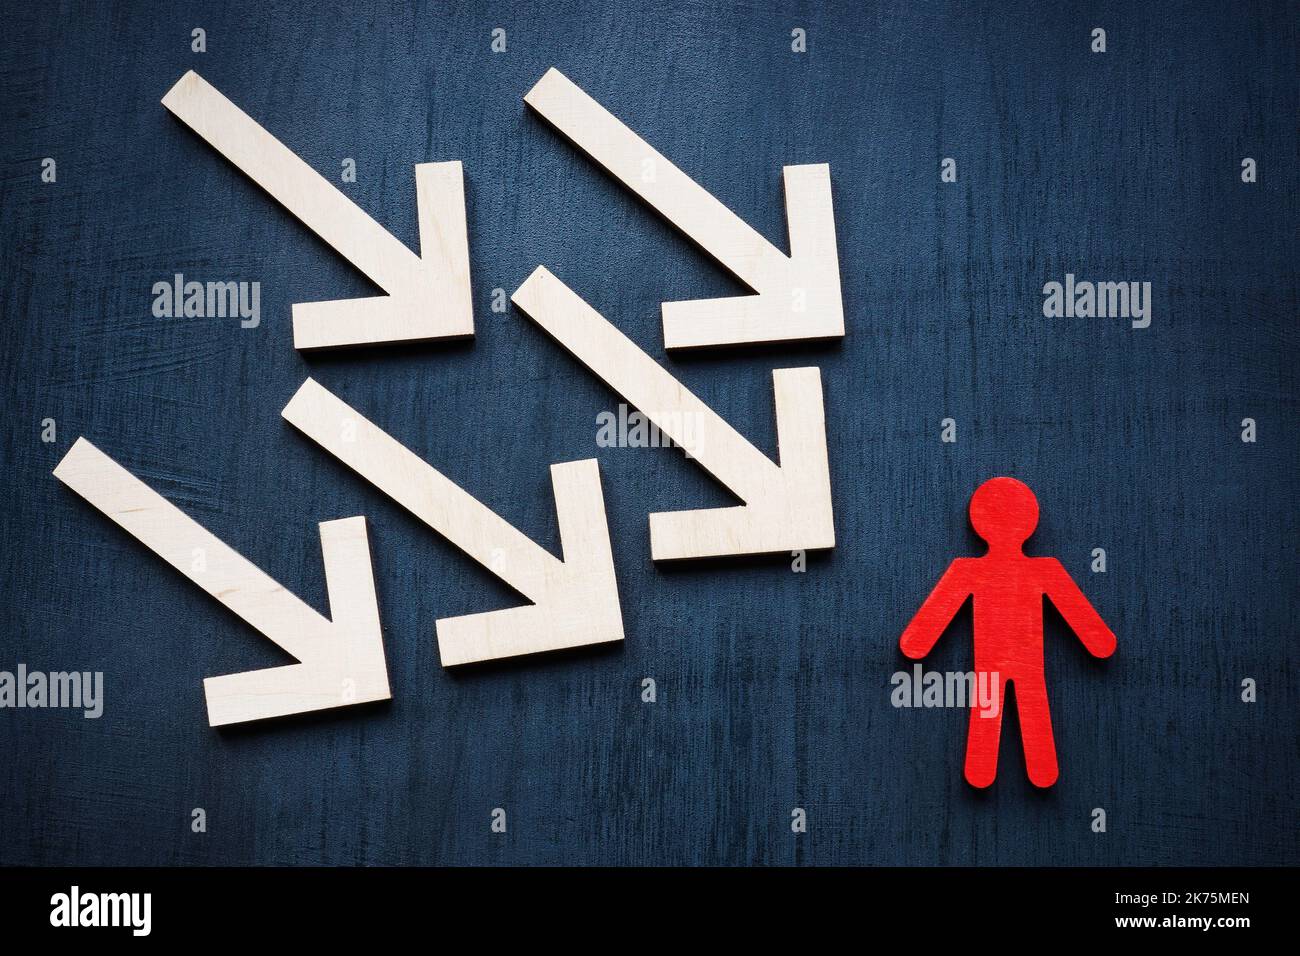 Assertiveness and resilience concept. Arrows and red figurine. Stock Photo